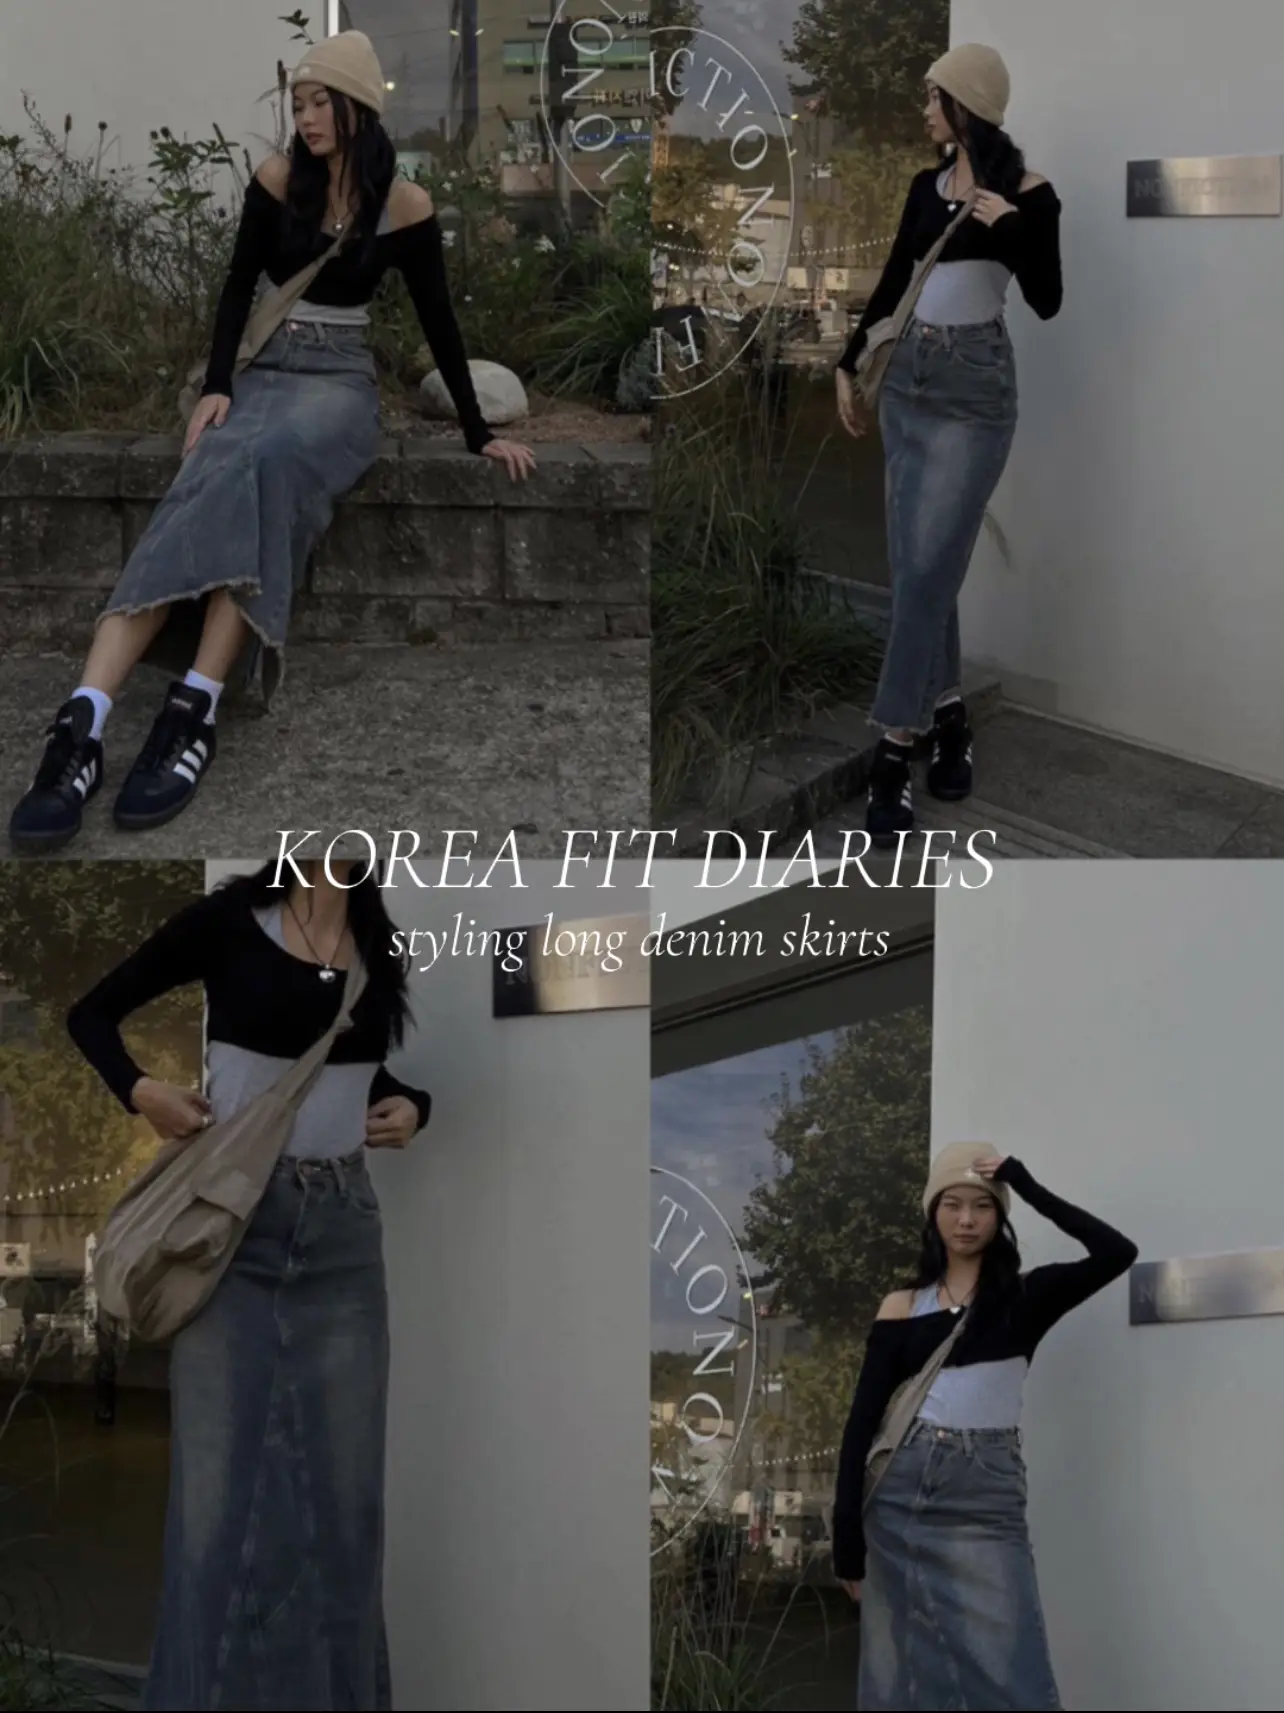 Korea fit diaries: styling long denim skirts ✩‧₊˚, Gallery posted by  alicia ❀